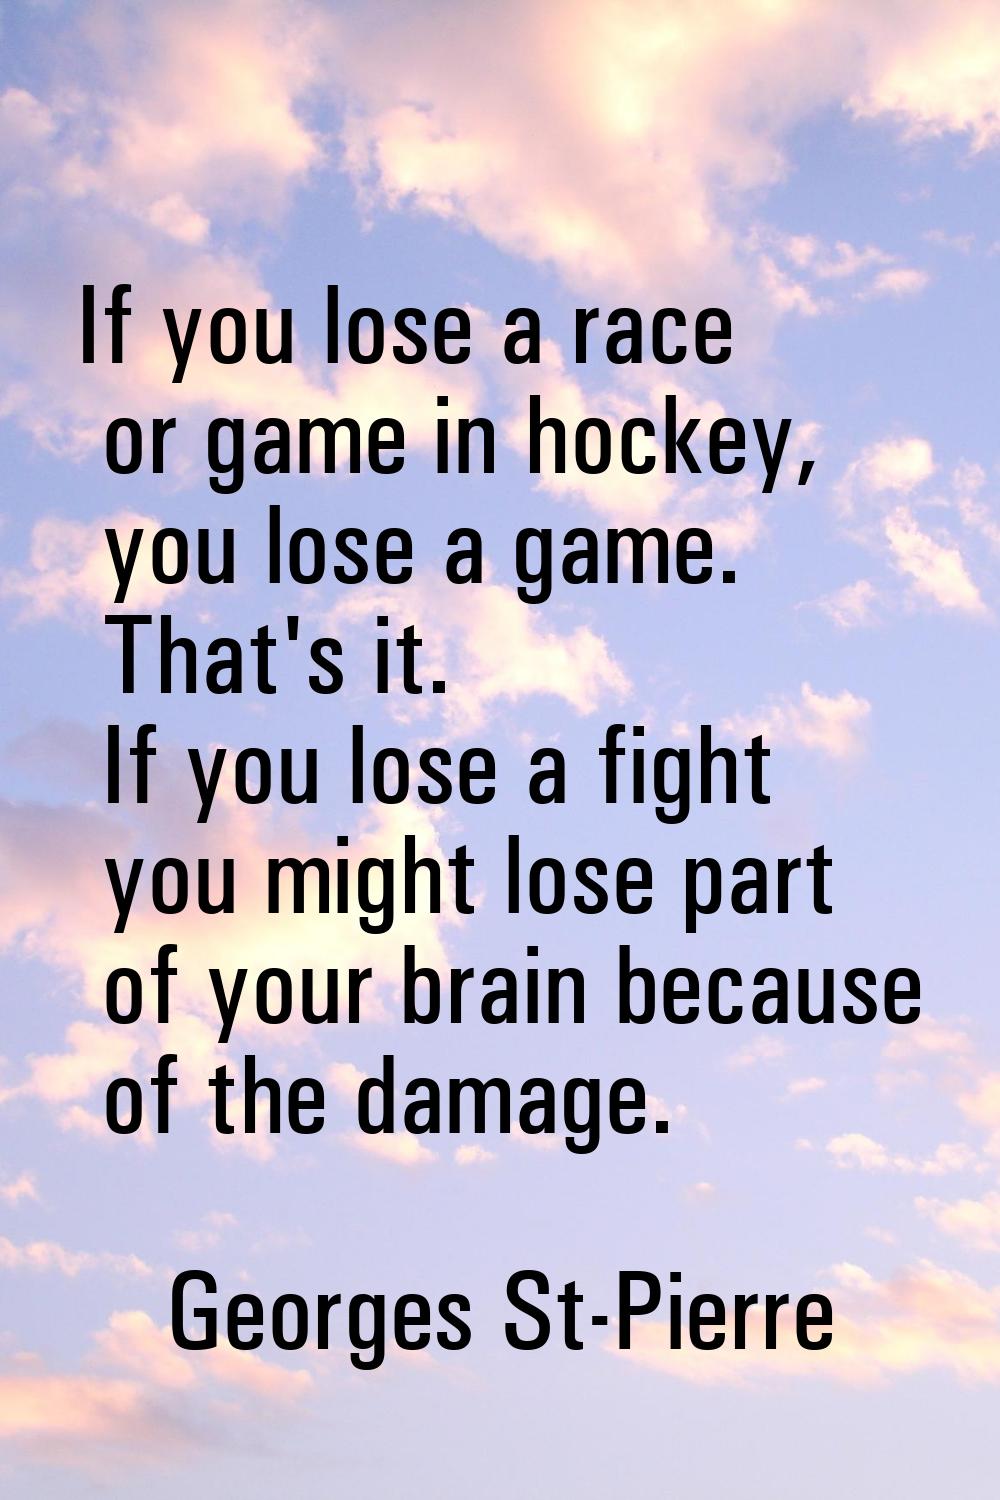 If you lose a race or game in hockey, you lose a game. That's it. If you lose a fight you might los